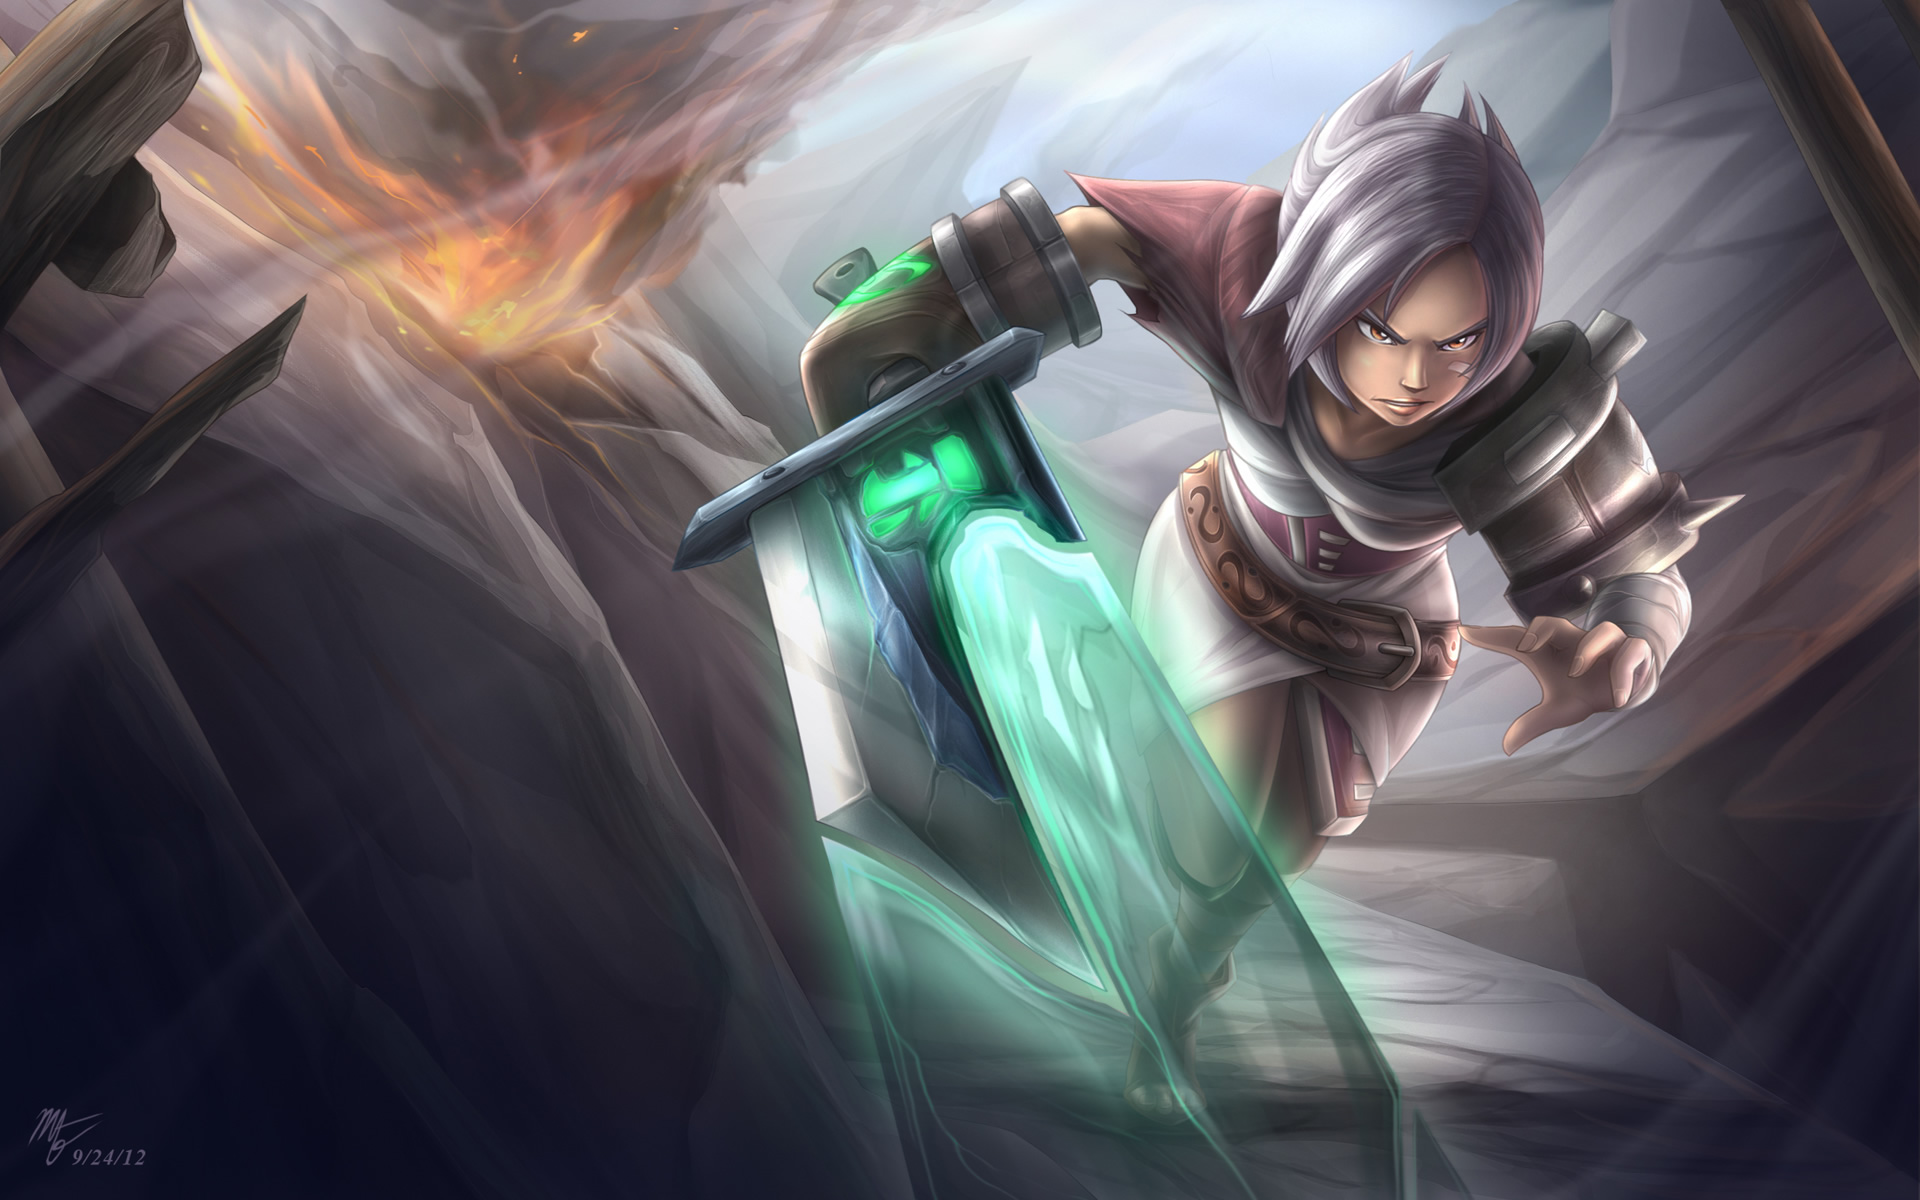 Download wallpapers Arcade Riven, League of Legends, green stone  background, main characters, Arcade Riven LoL, League of Legends  characters, Arcade Riven League of Legends, Arcade Riven Skin for desktop  free. Pictures for